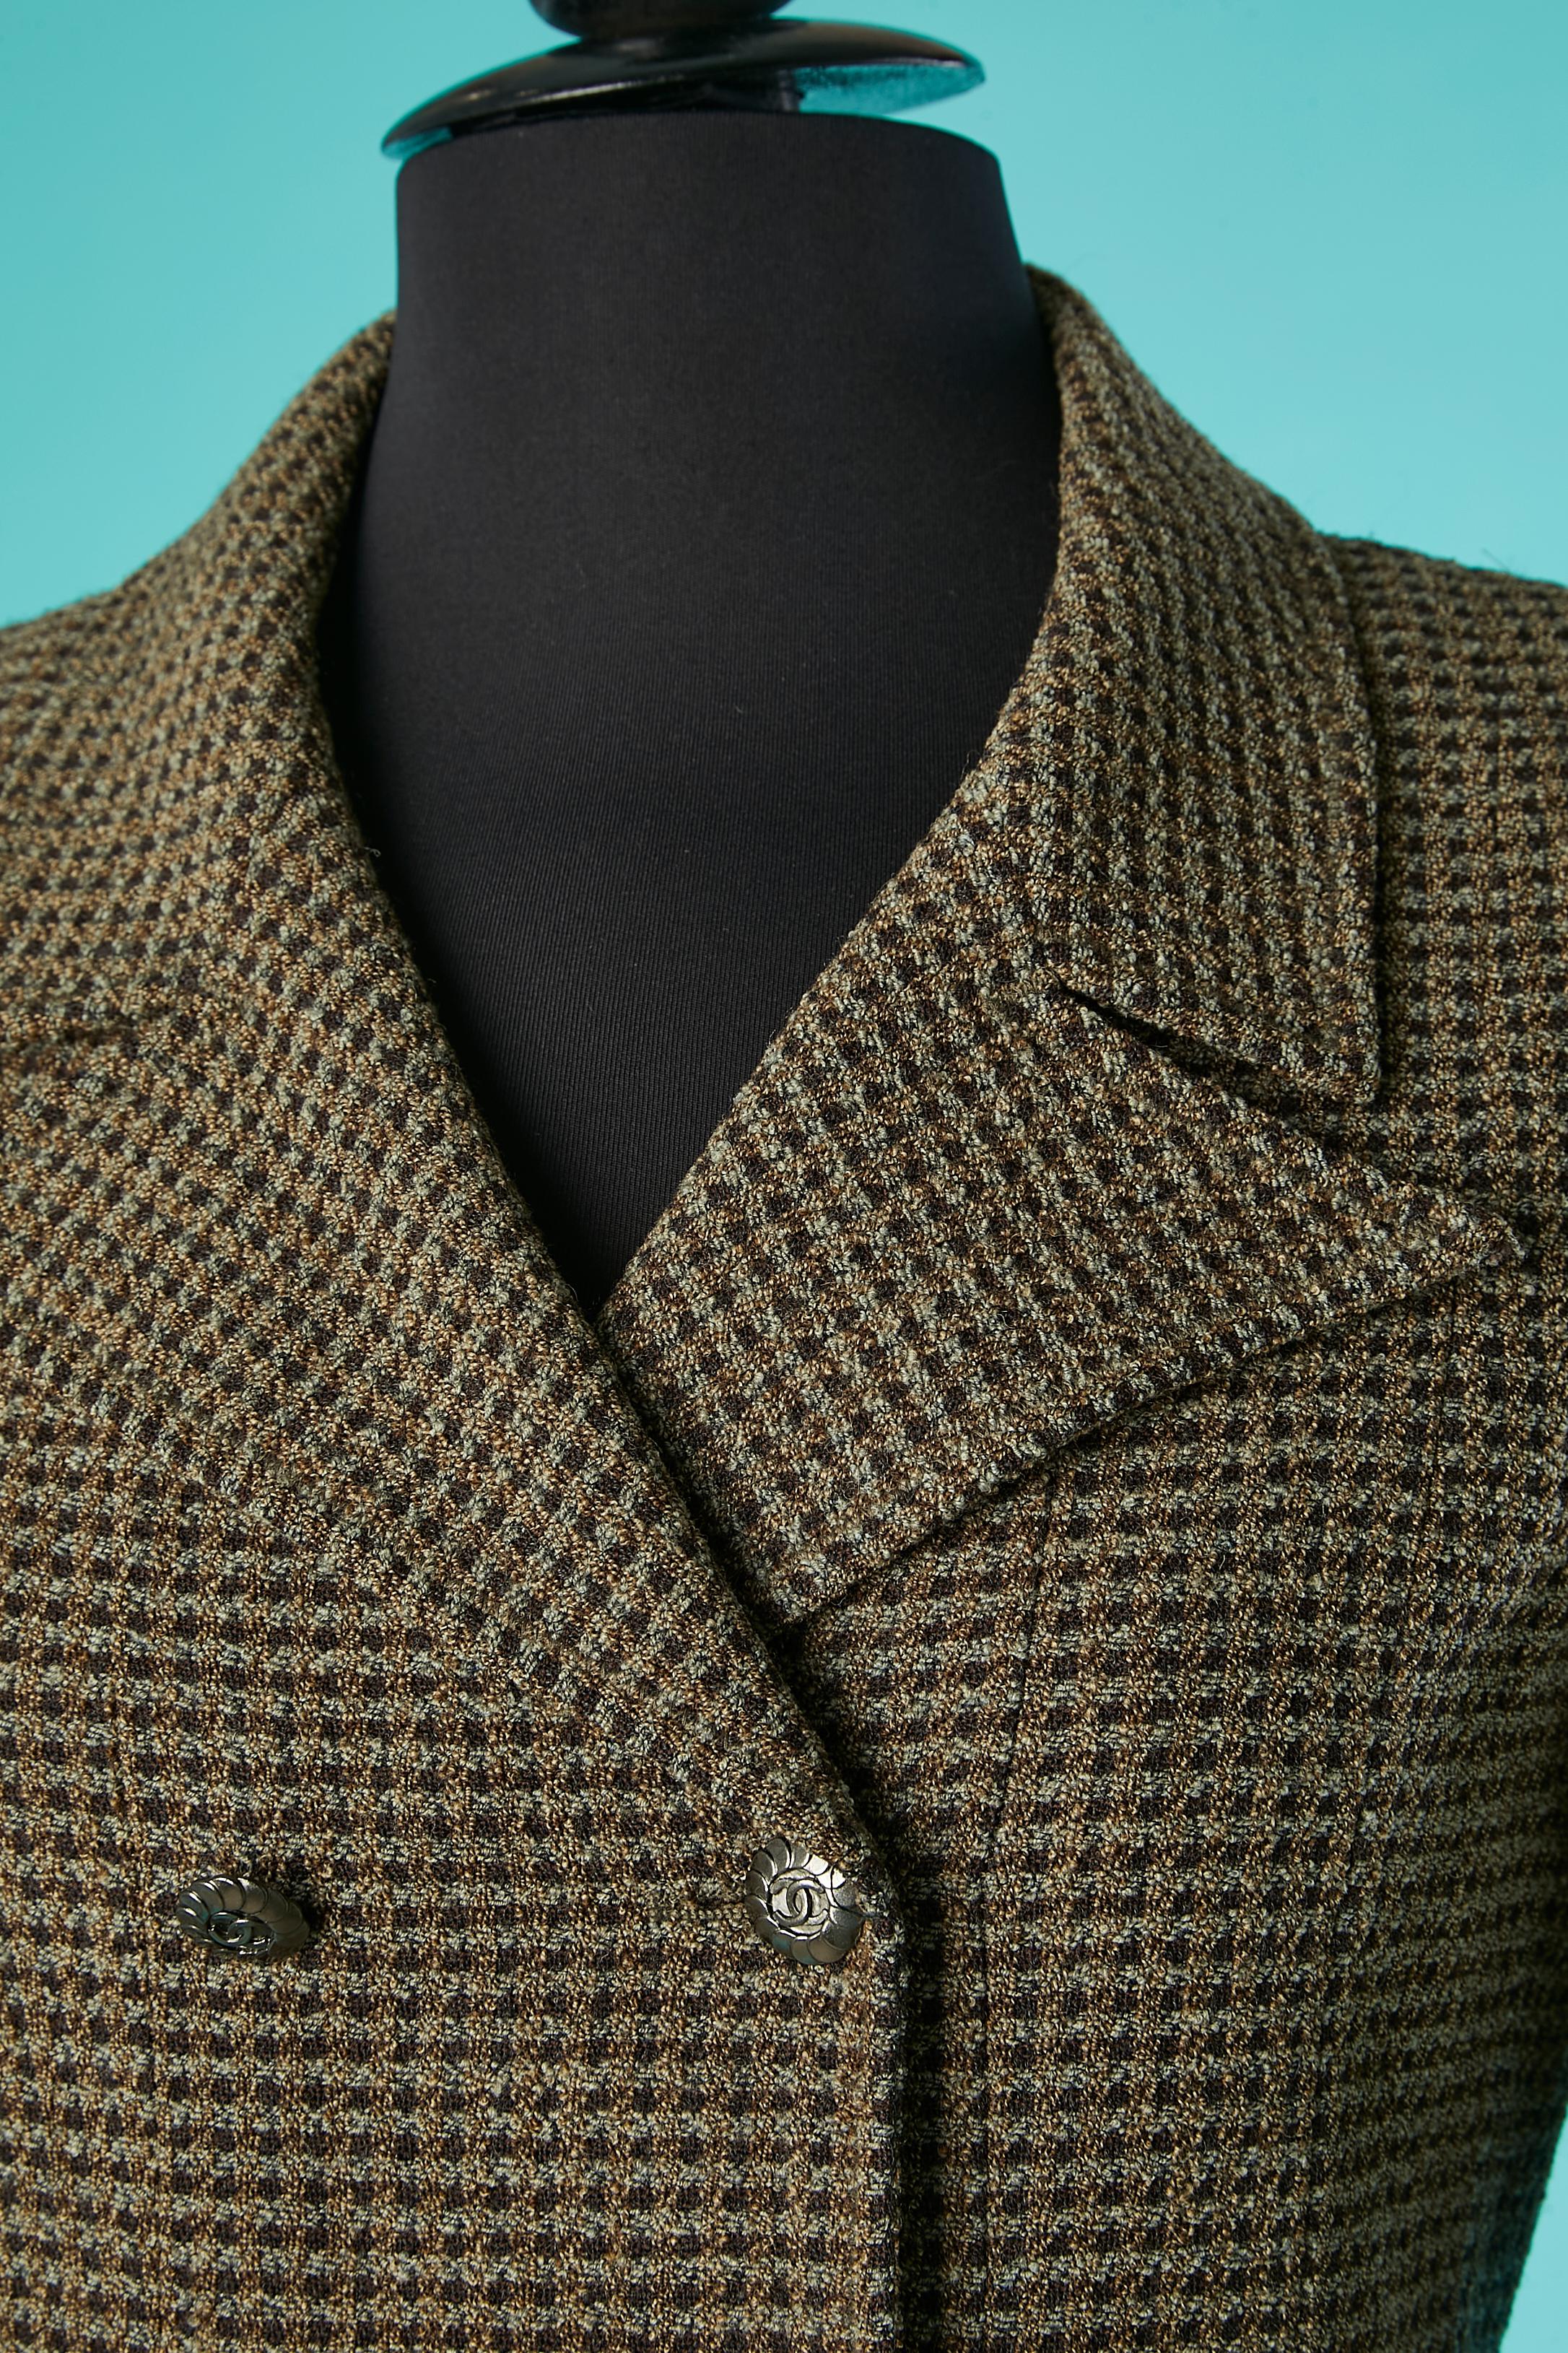 Double-breasted kaki and brown tweed jacket. Main fabric composition: 90% wool, 10% nylon. Branded 